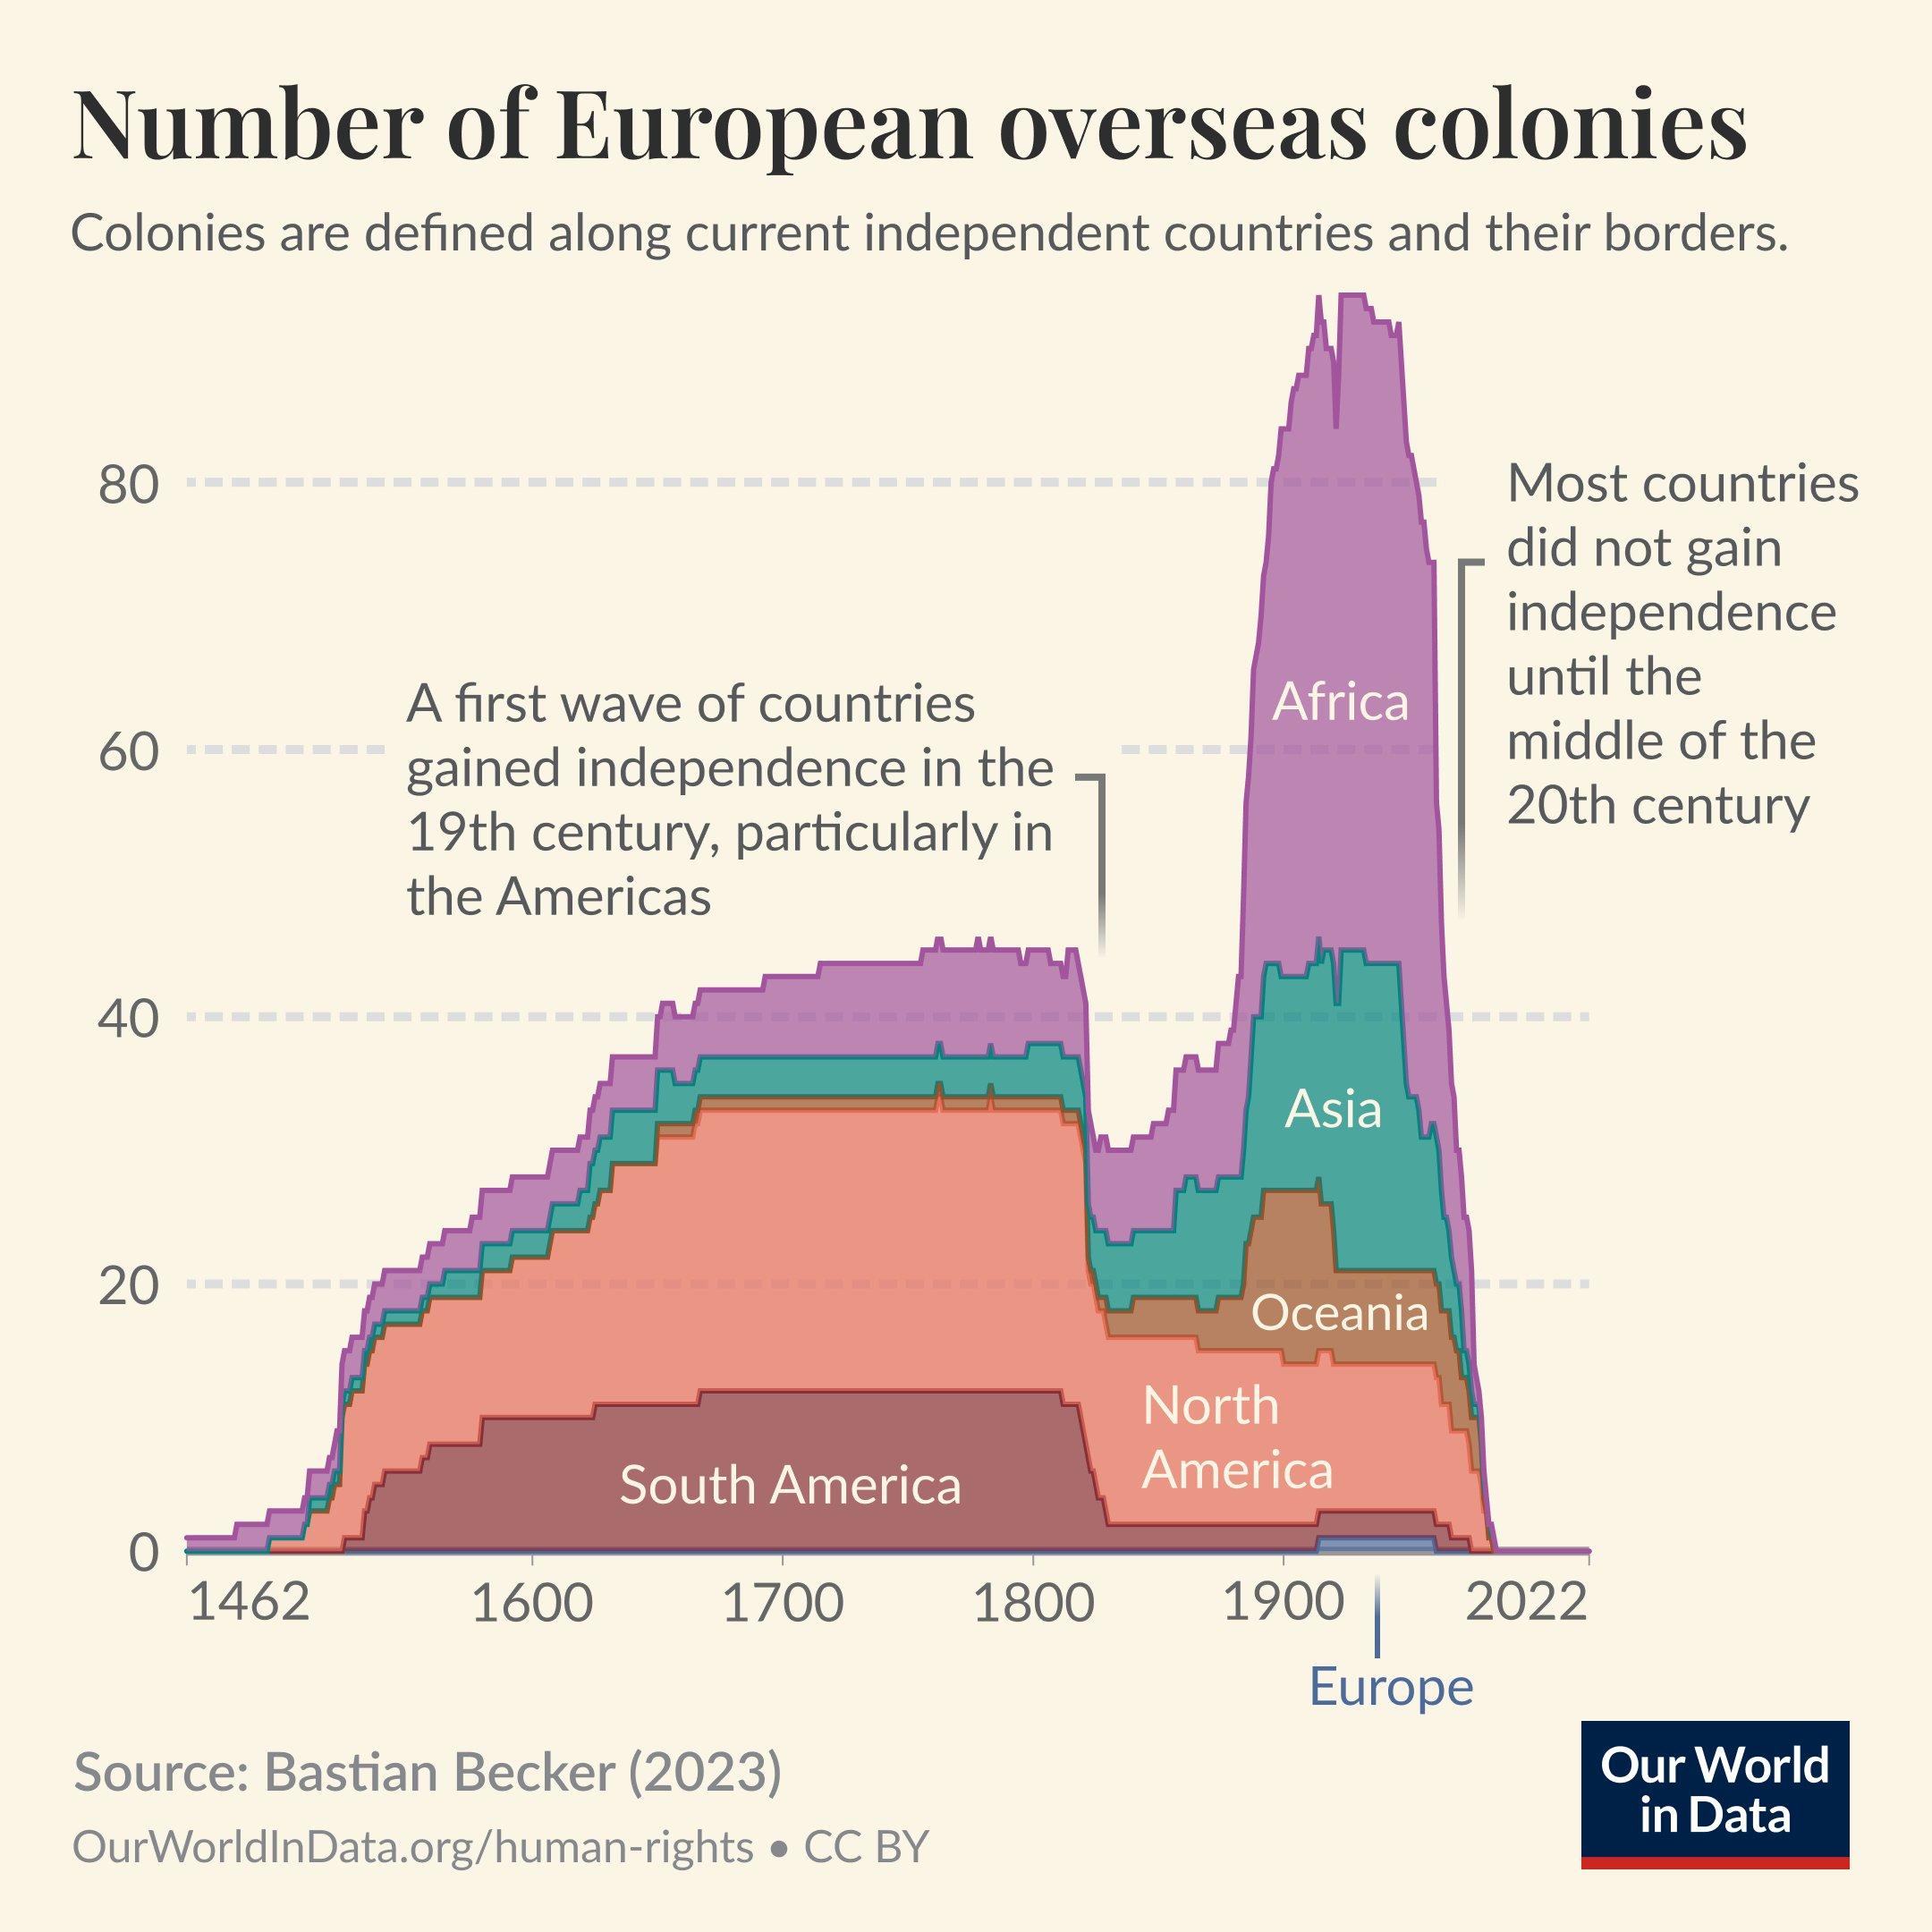 Charting the Historical Prevalence of European Overseas Colonies